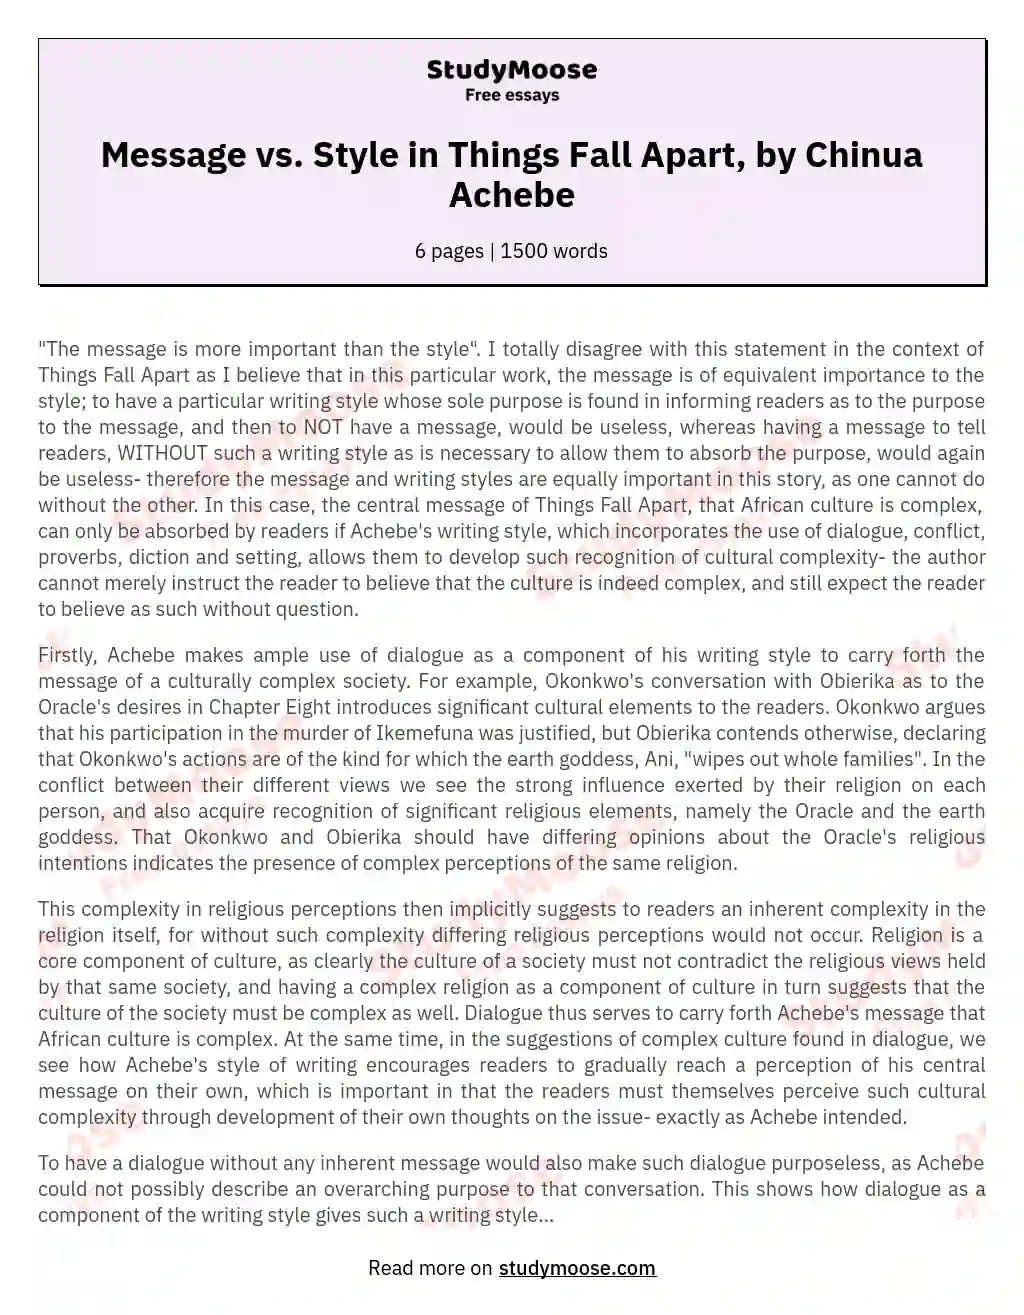 Message vs. Style in Things Fall Apart, by Chinua Achebe essay